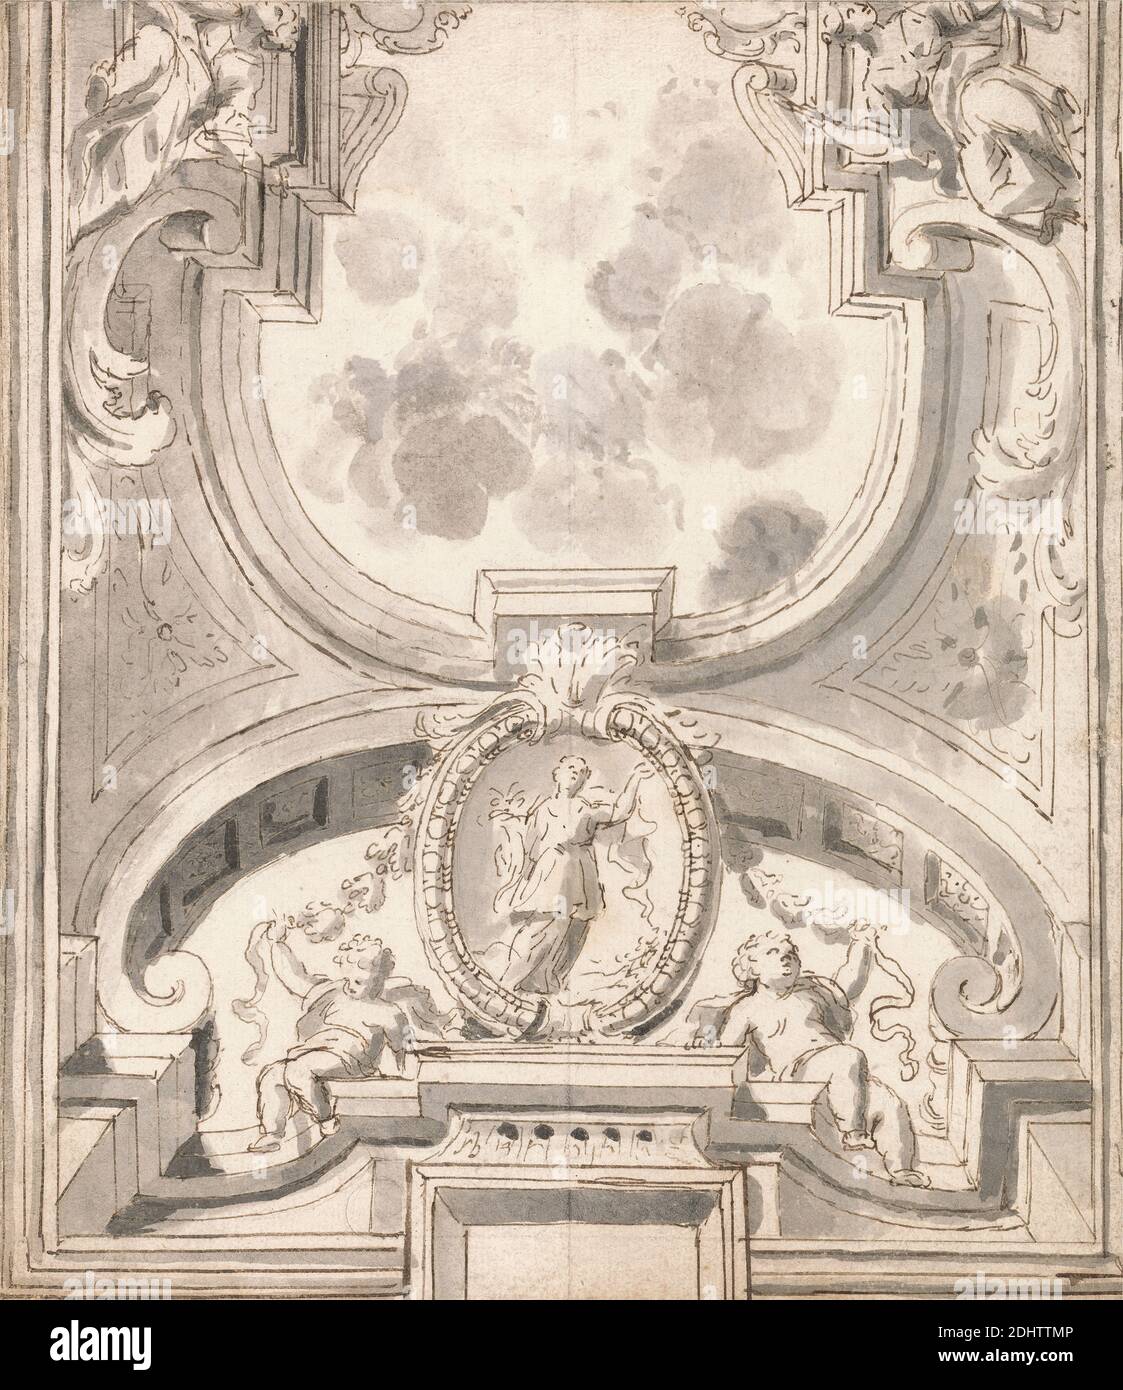 Design for Ceiling Decoration, Attributed to Thomas Carwitham, active 1723, British, undated, Graphite, gray wash, and pen and brown ink on medium, moderately textured, cream wove paper, Sheet: 9 3/4 x 8 1/2 inches (24.8 x 21.6 cm), ceilings, garlands, putti, women Stock Photo